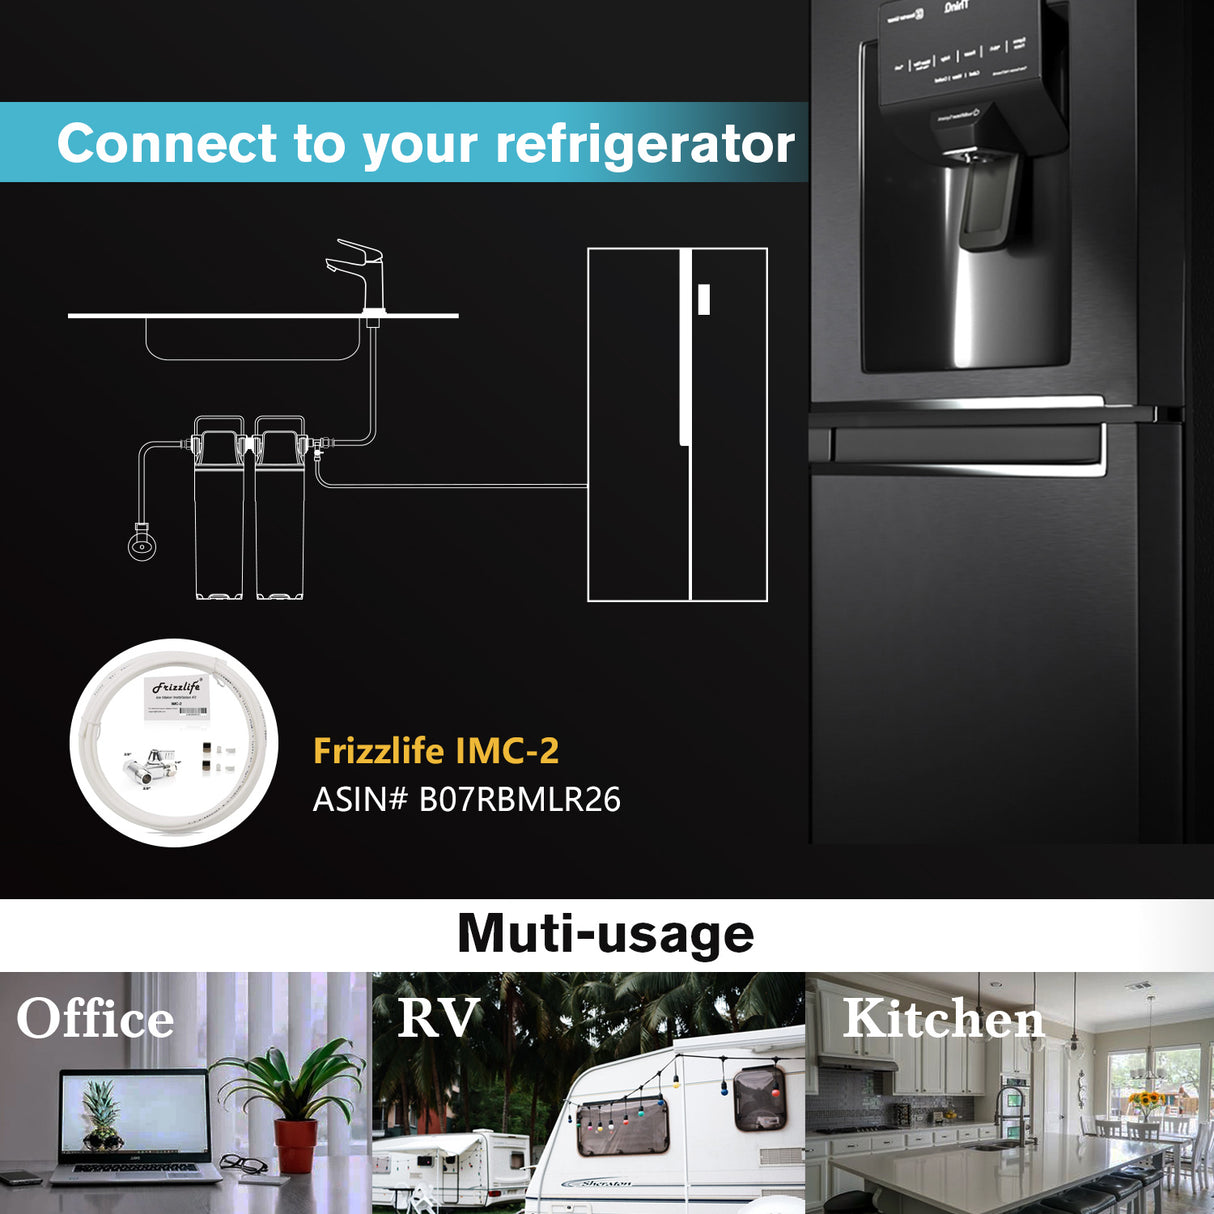 Frizzlife DW15 Under Sink Water Filter System, NSF/ANSI 53&42 Certified Elements, Connect 2-Stage Water Filter